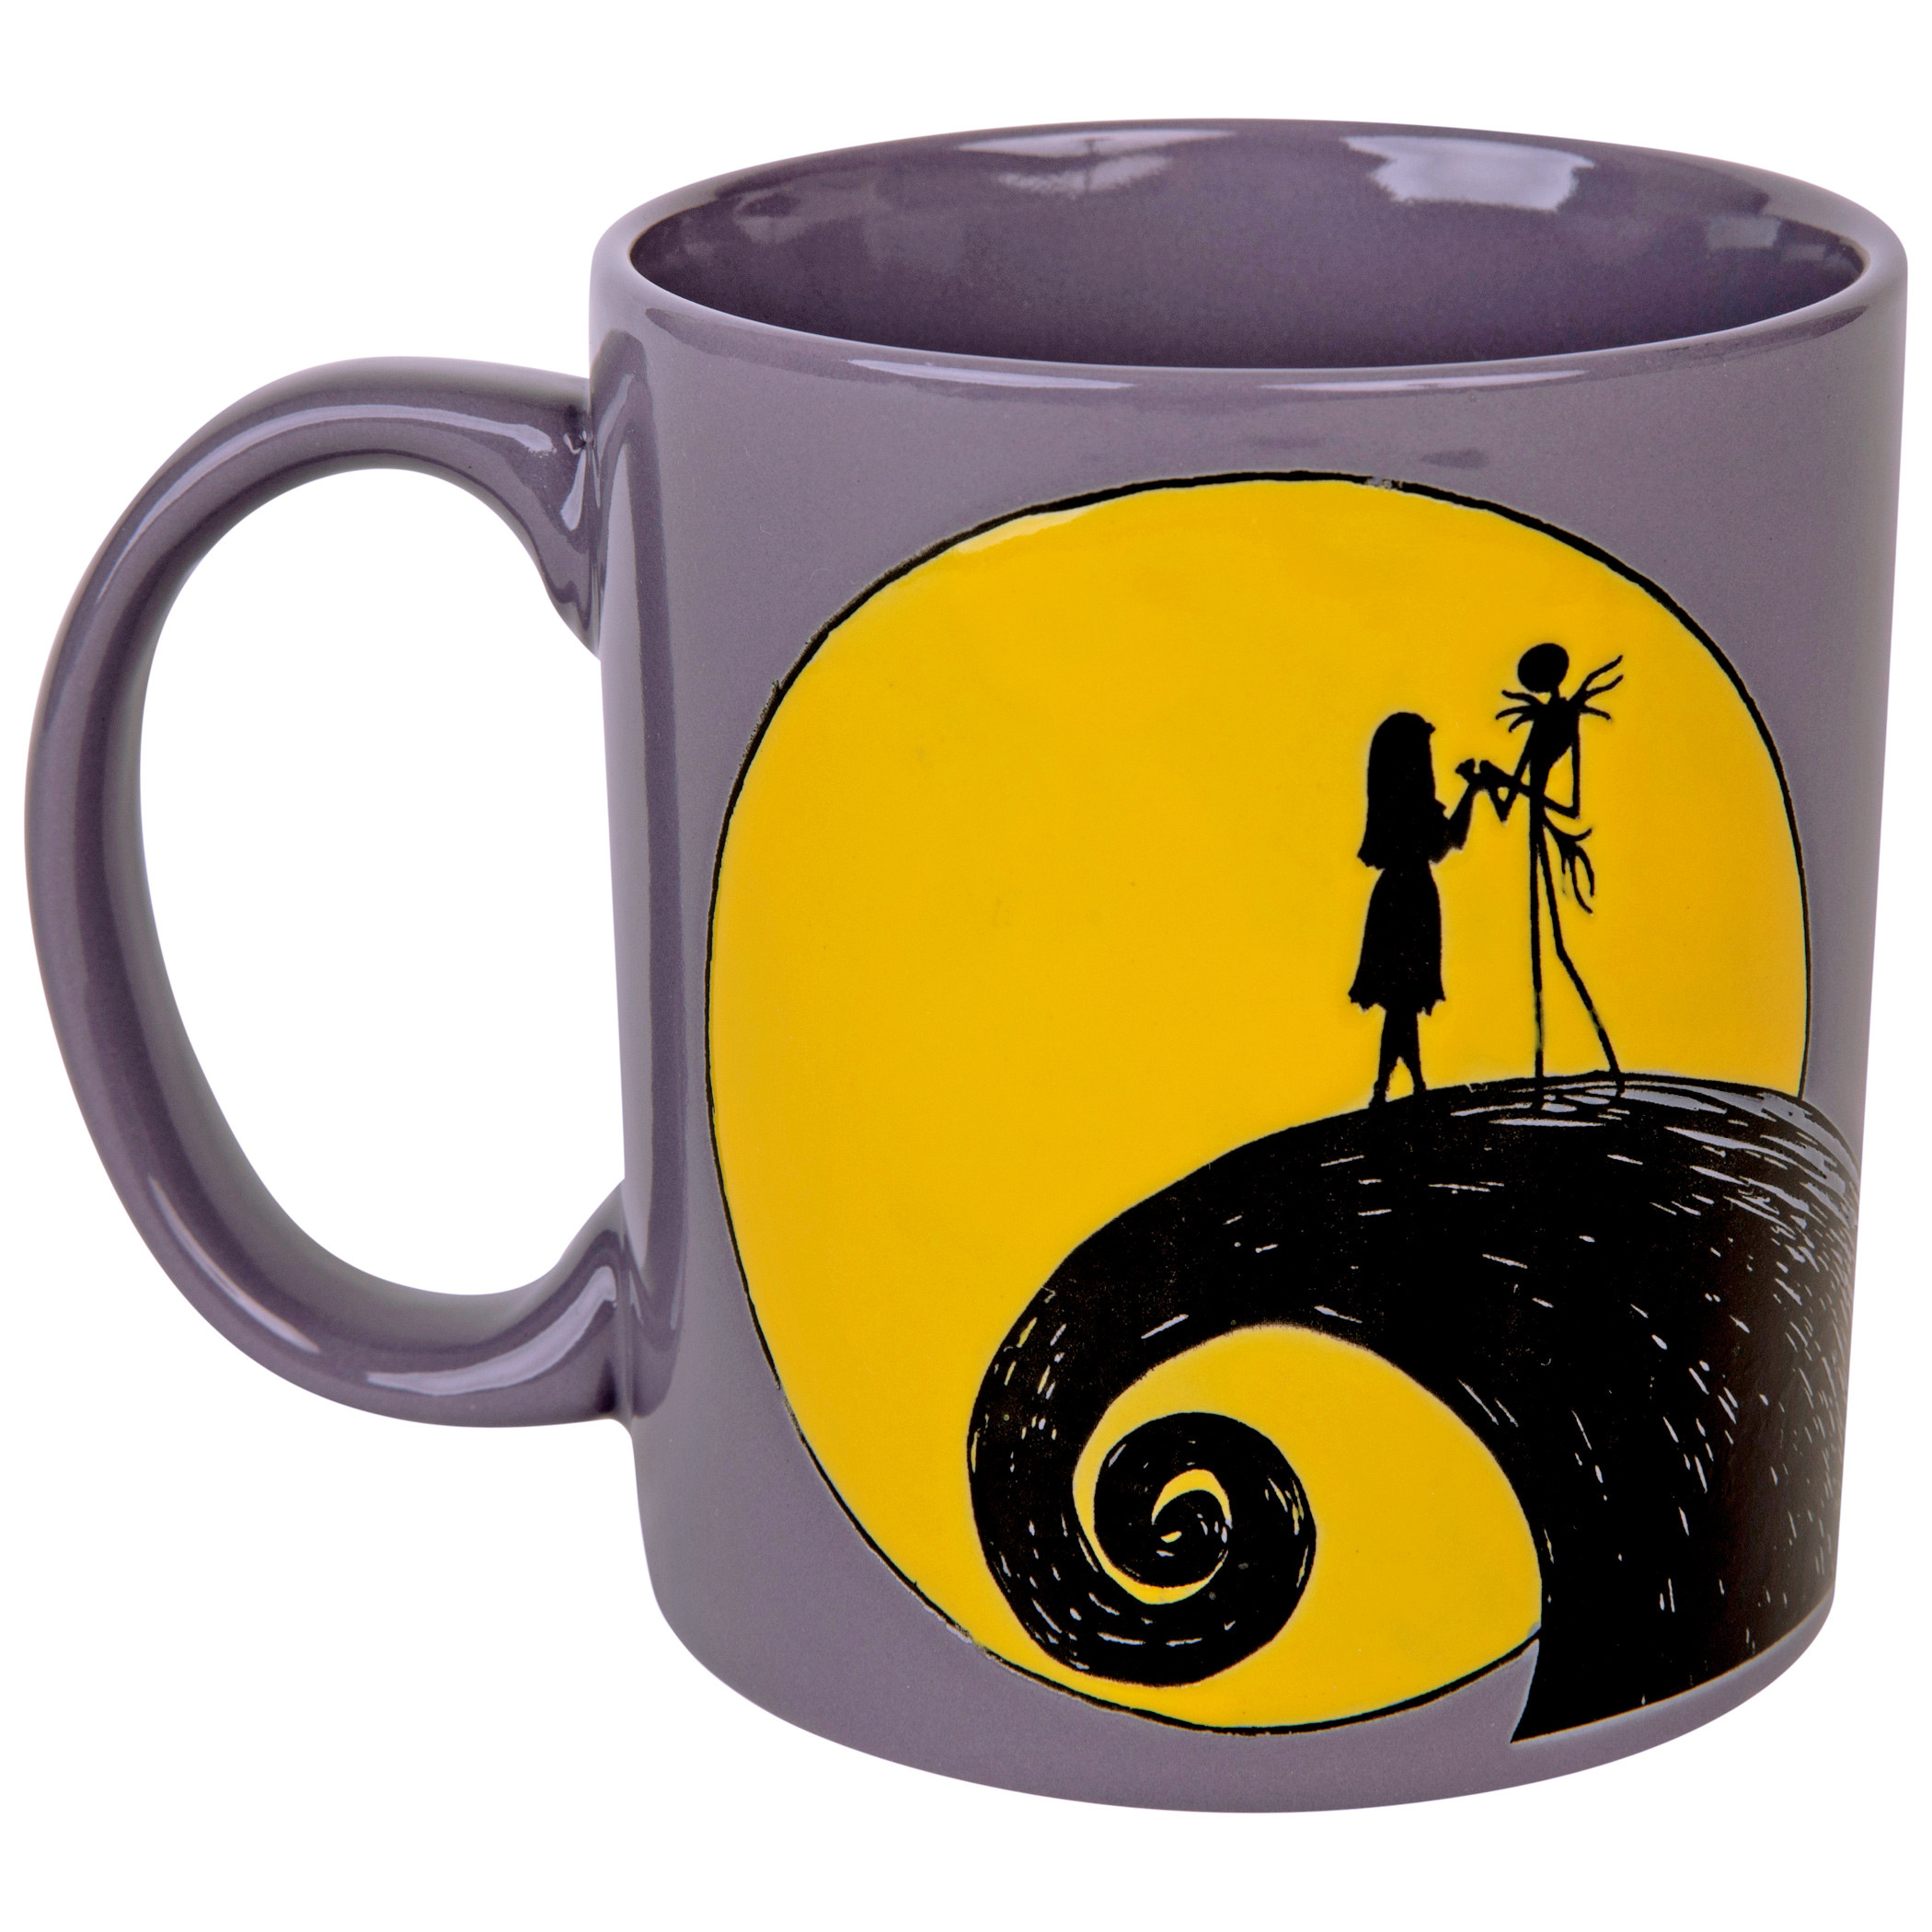 Nightmare Before Christmas Car Cup Holder Coaster 2-Pack